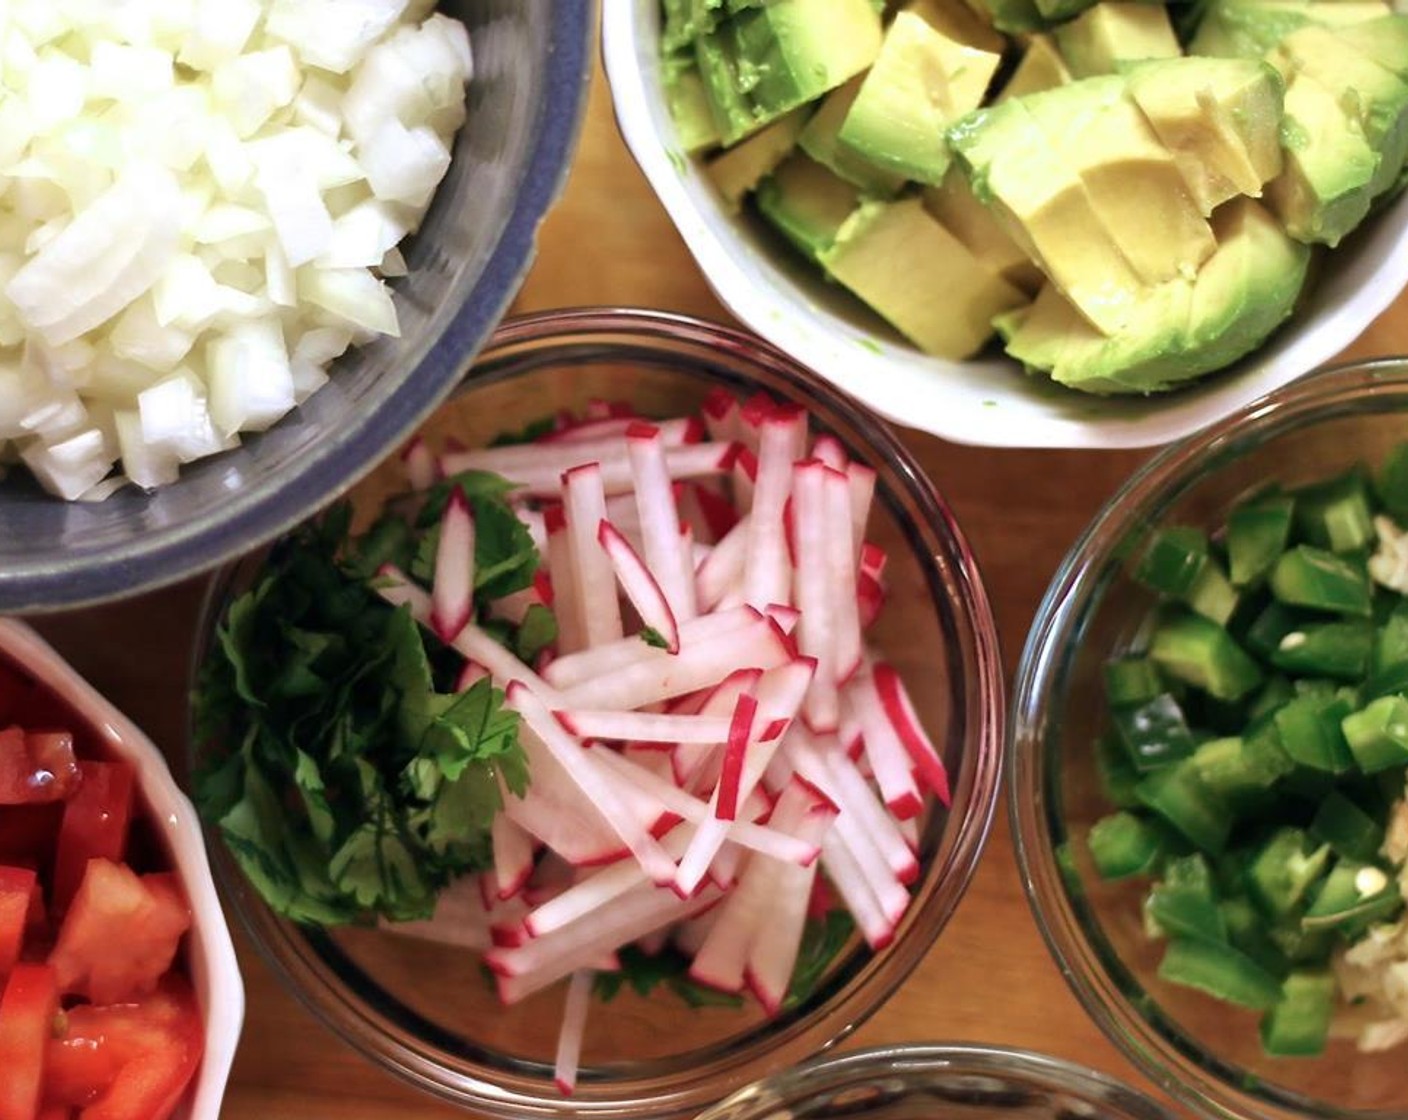 step 4 Dice the Avocado (1), chop the Fresh Cilantro (1 handful), and julienne the Radish (1 bunch).